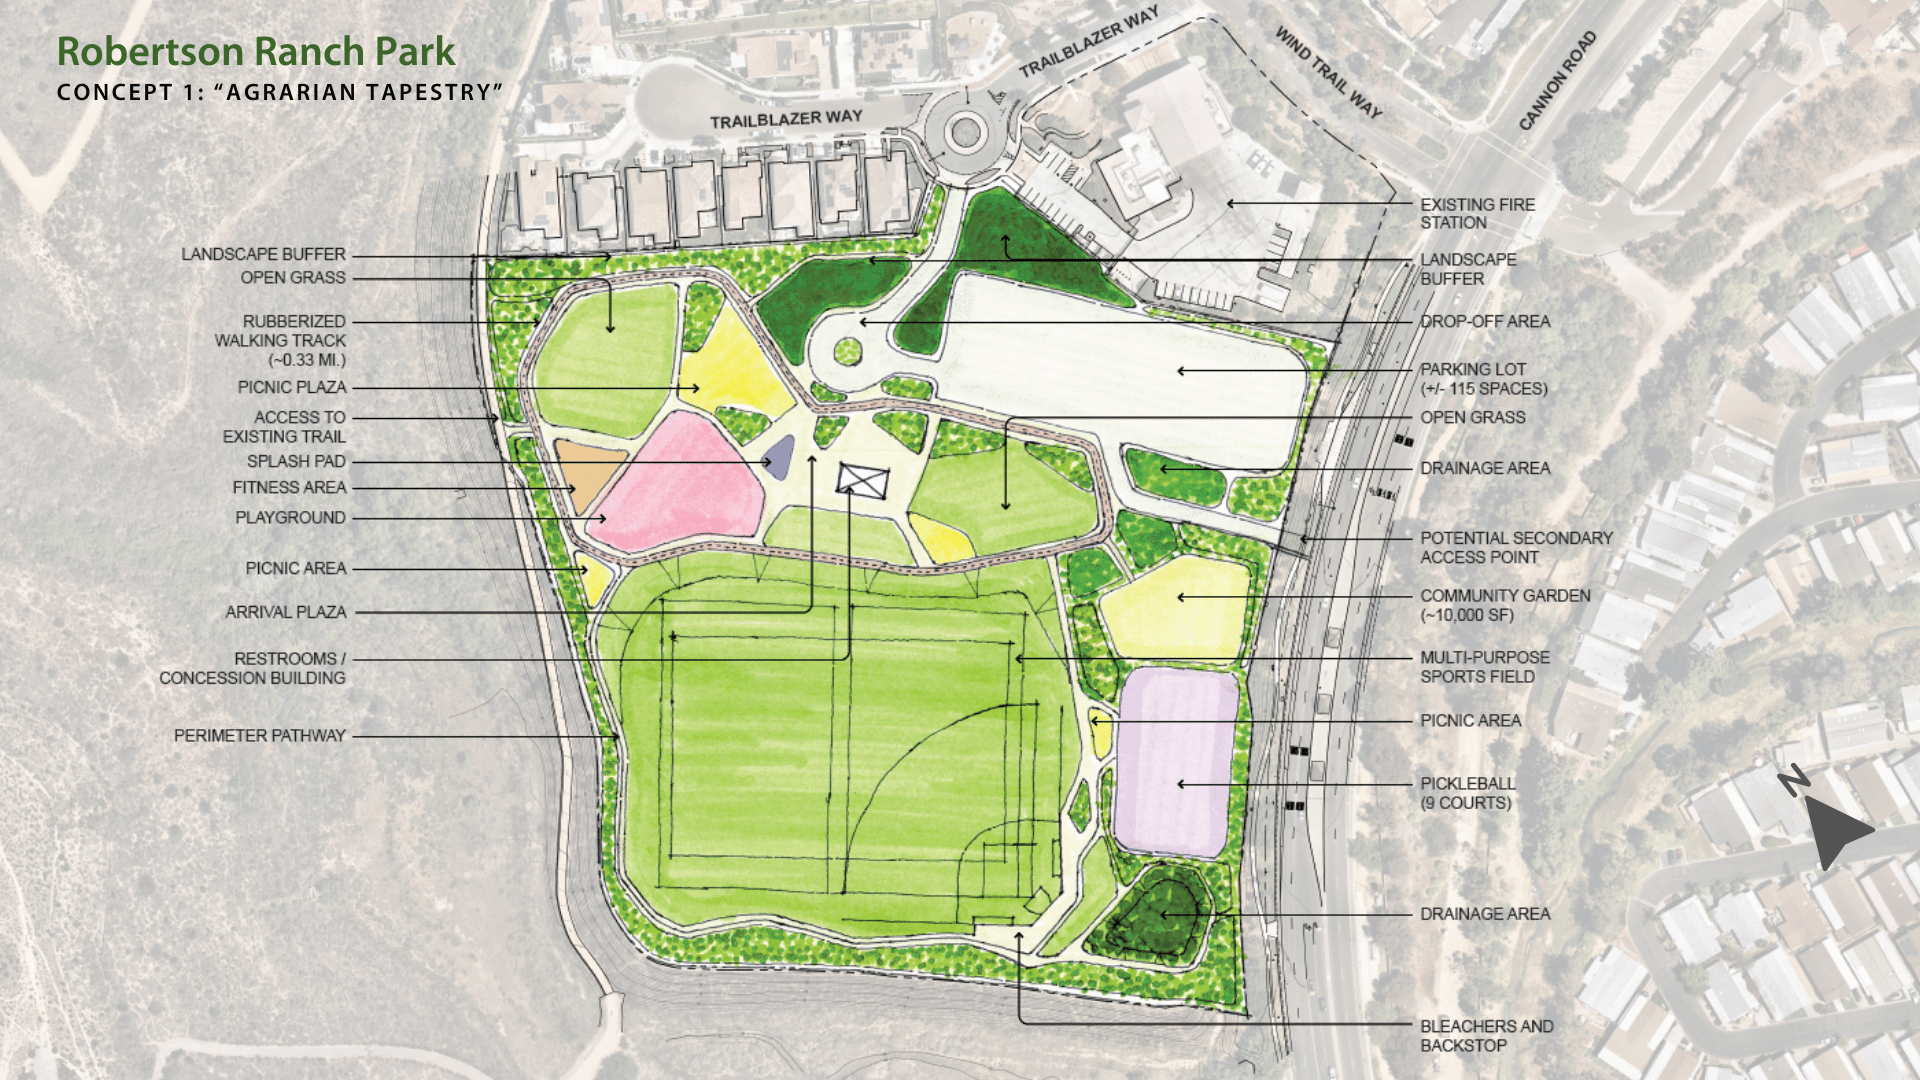 A detailed drawing shows all of the features and amenities of the Agrarian Tapestry park design concept.